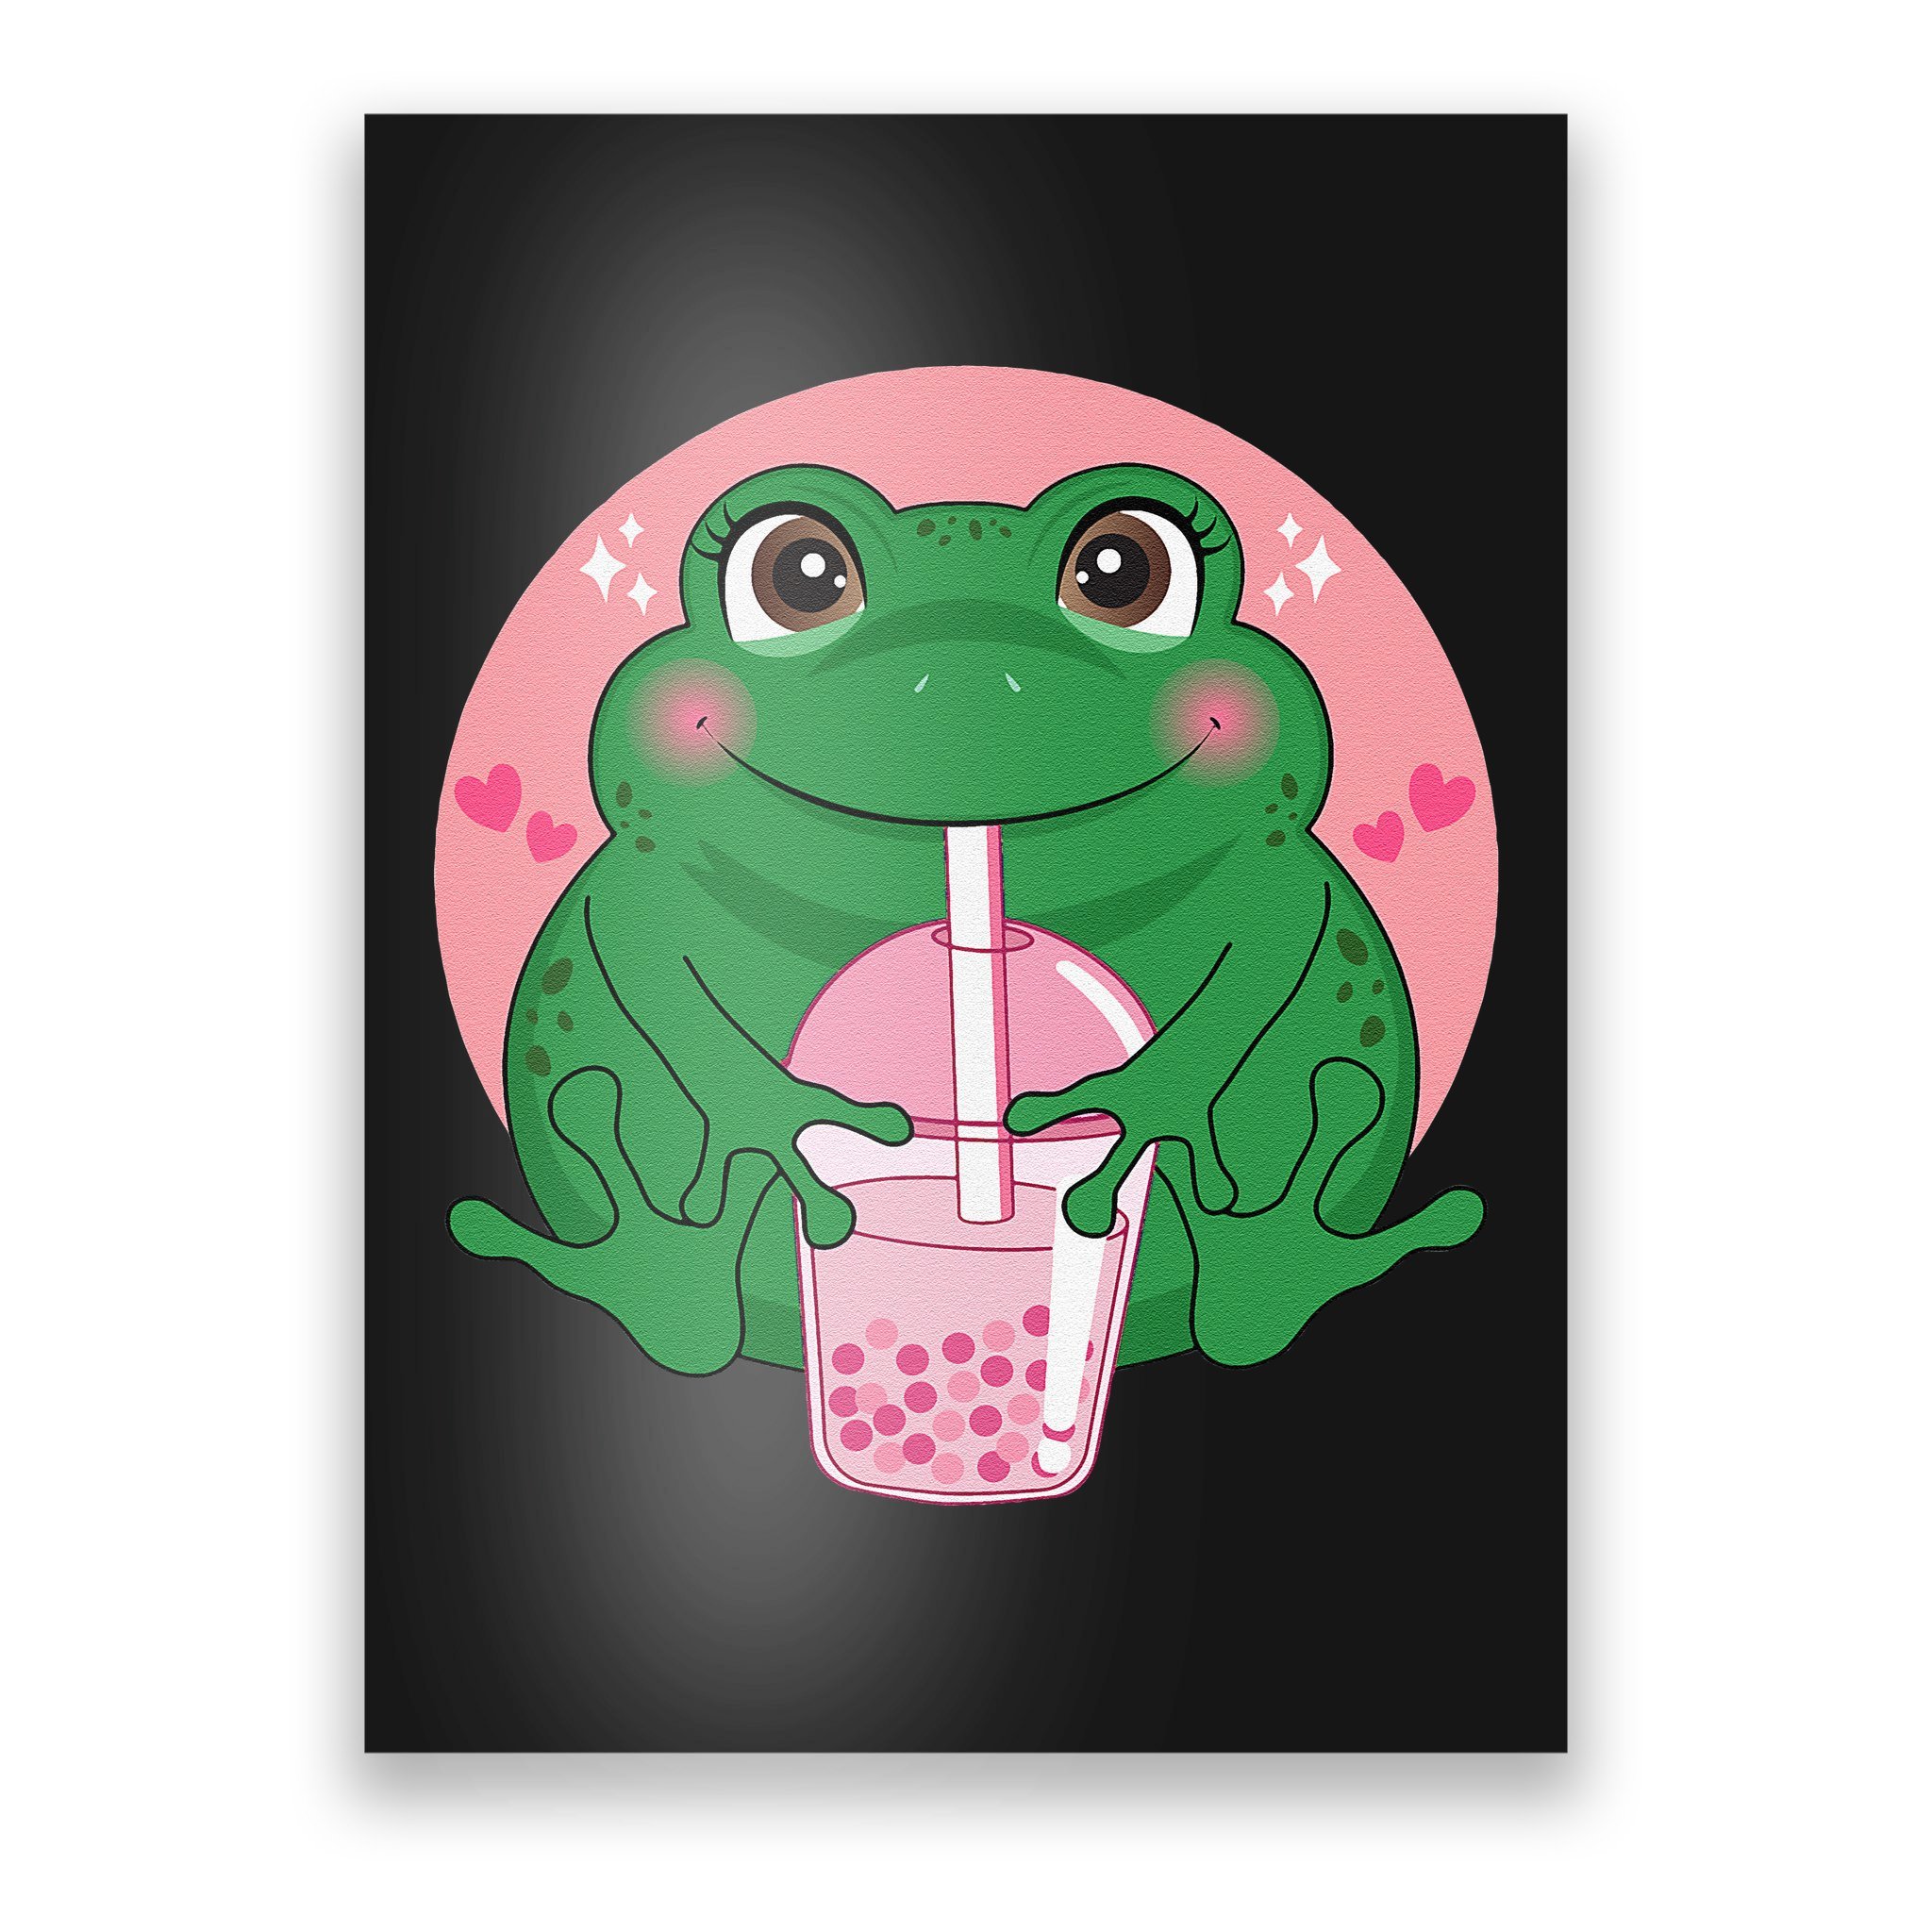 116,367 Cute Frog Images, Stock Photos, 3D objects, & Vectors | Shutterstock